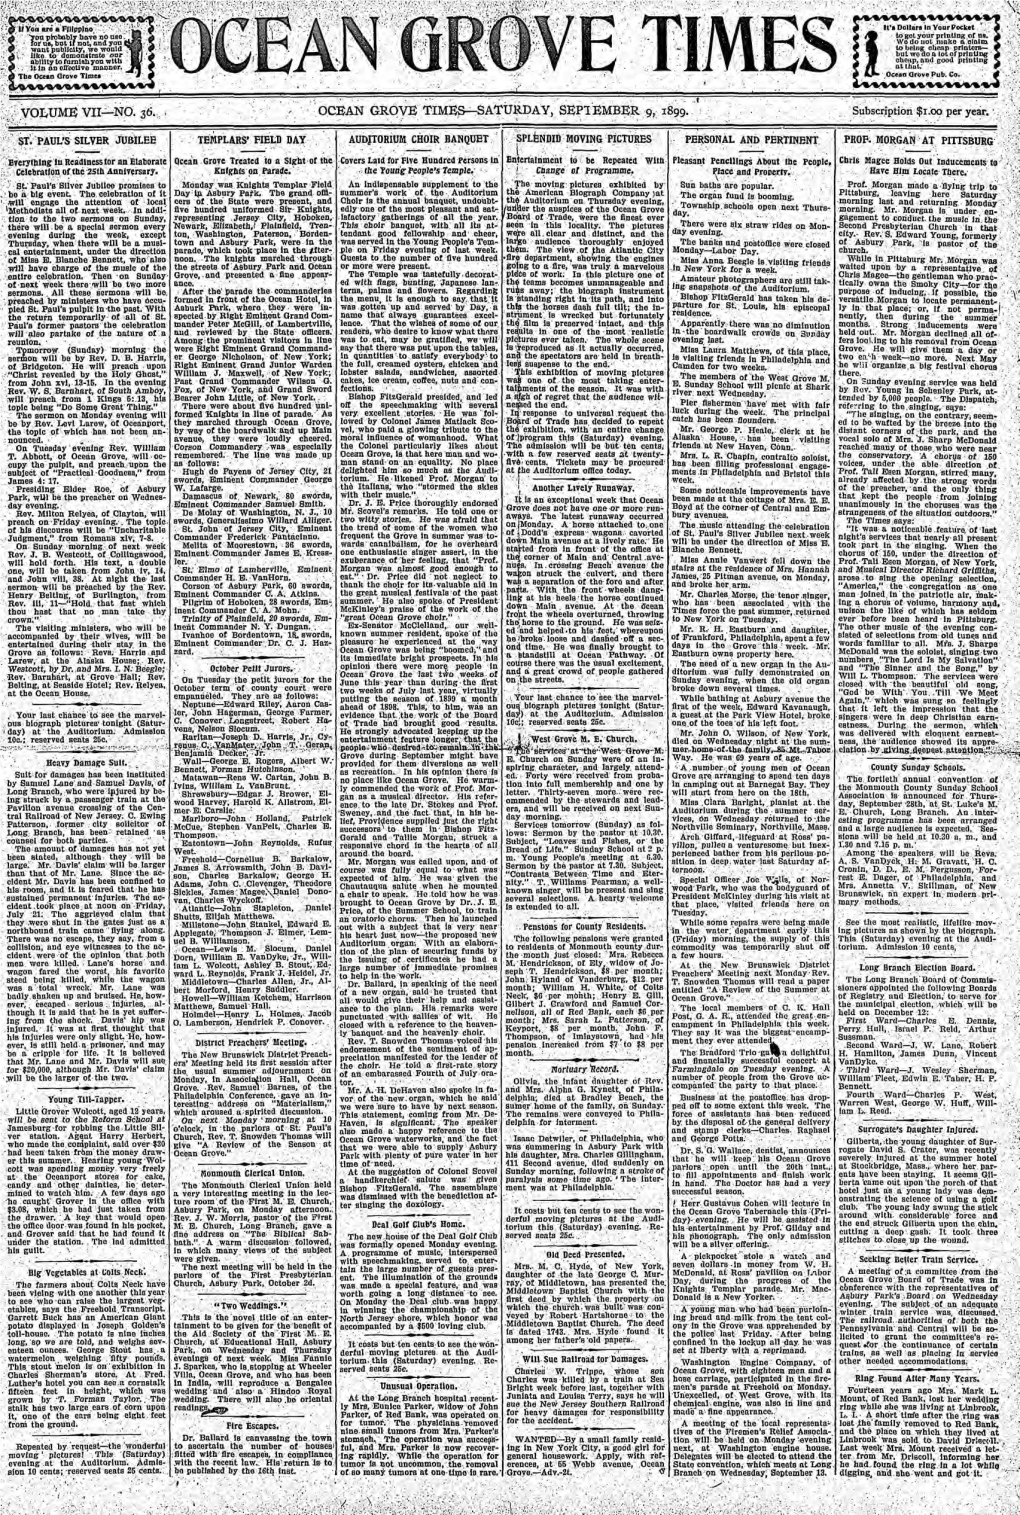 EMBER 9, 1899. Subscription $1.00 Per Year